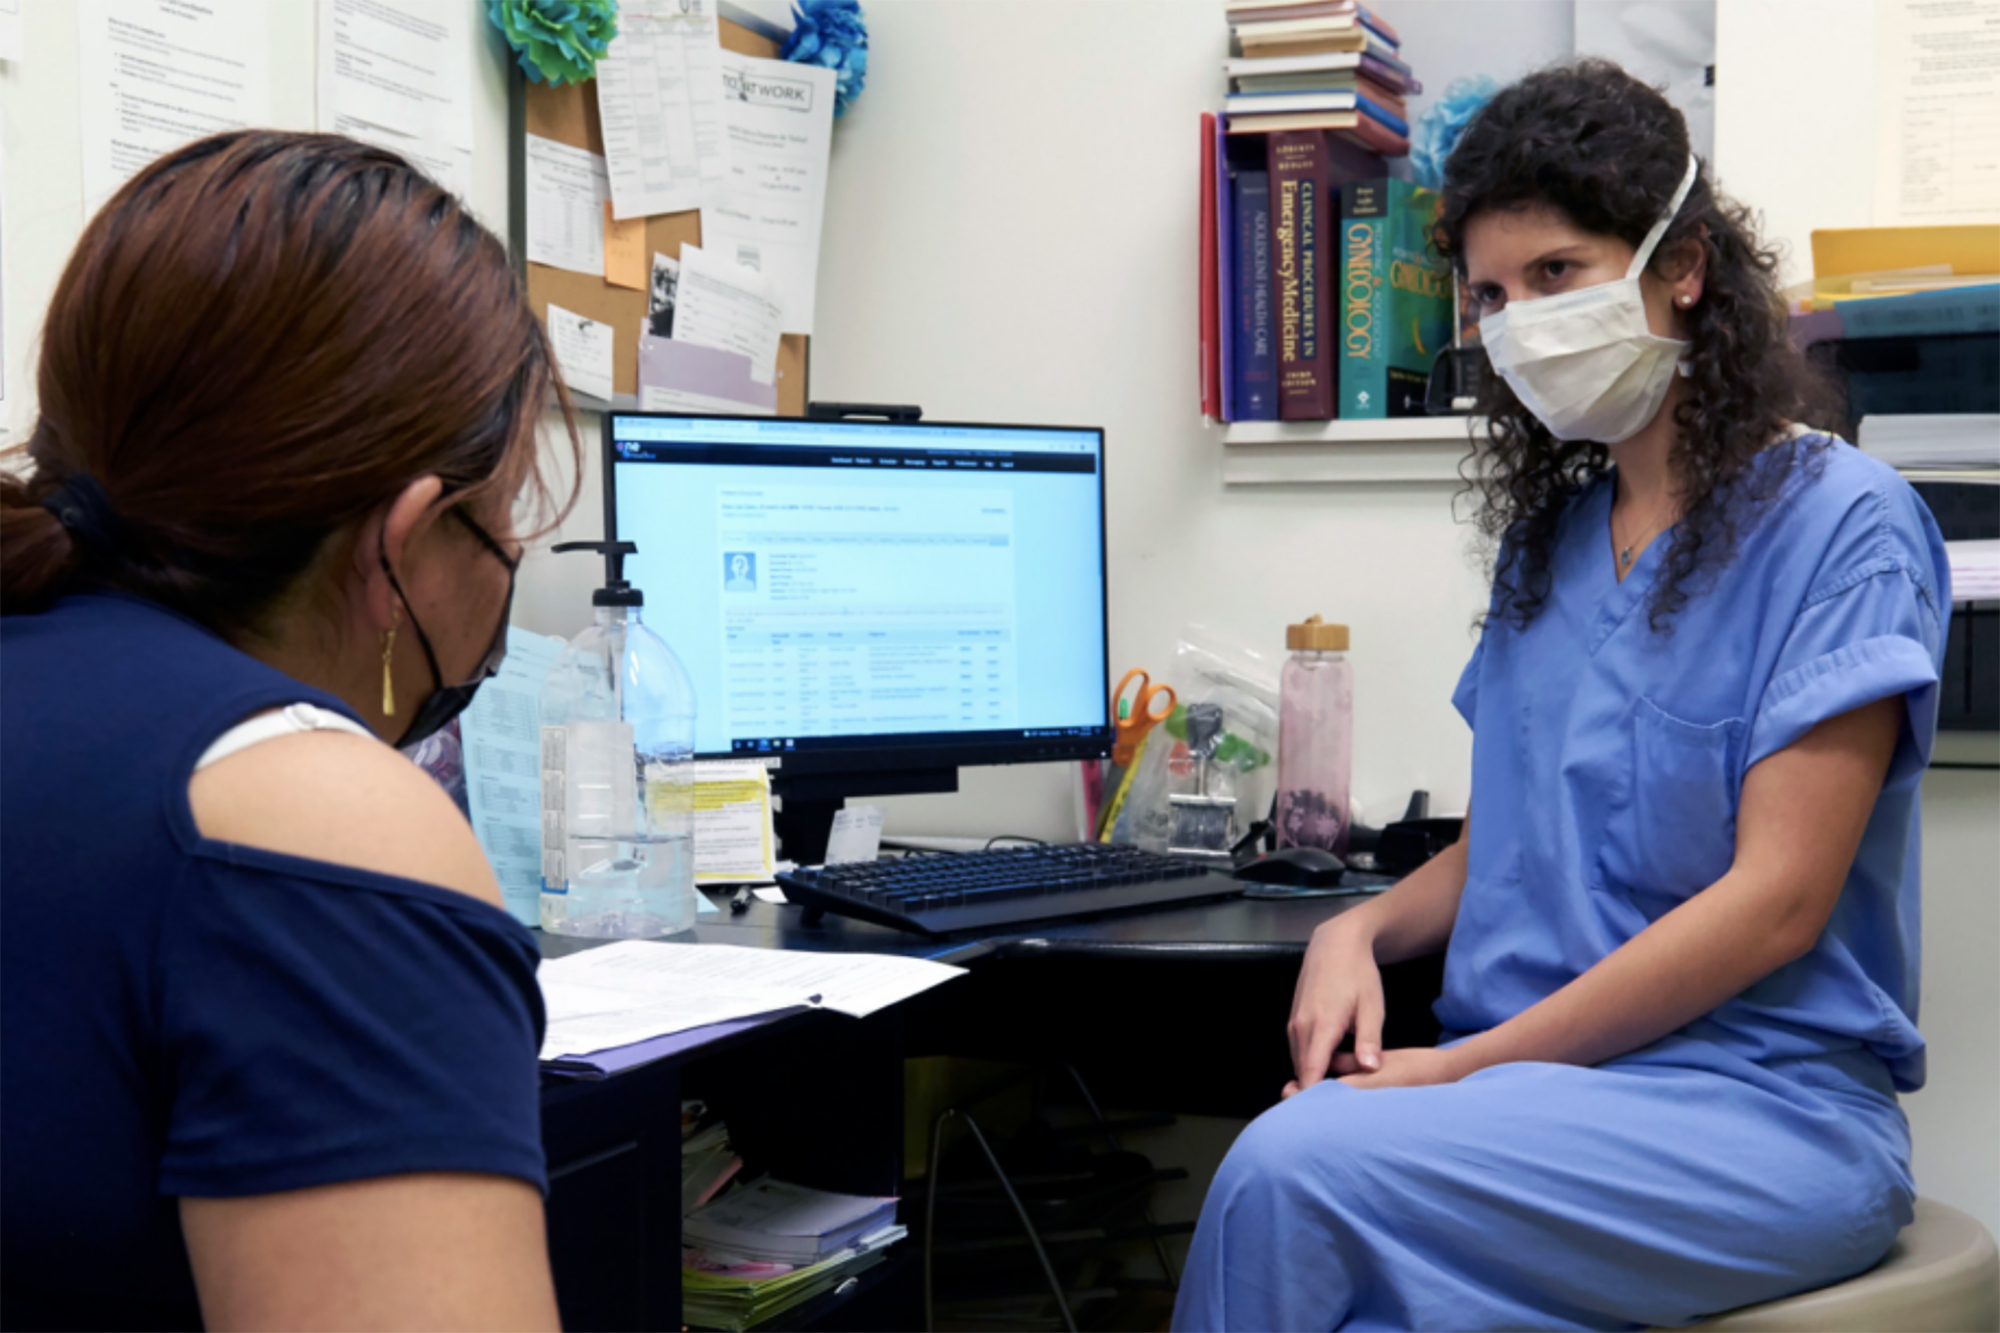 A medical professional sits with a patient at their desk.